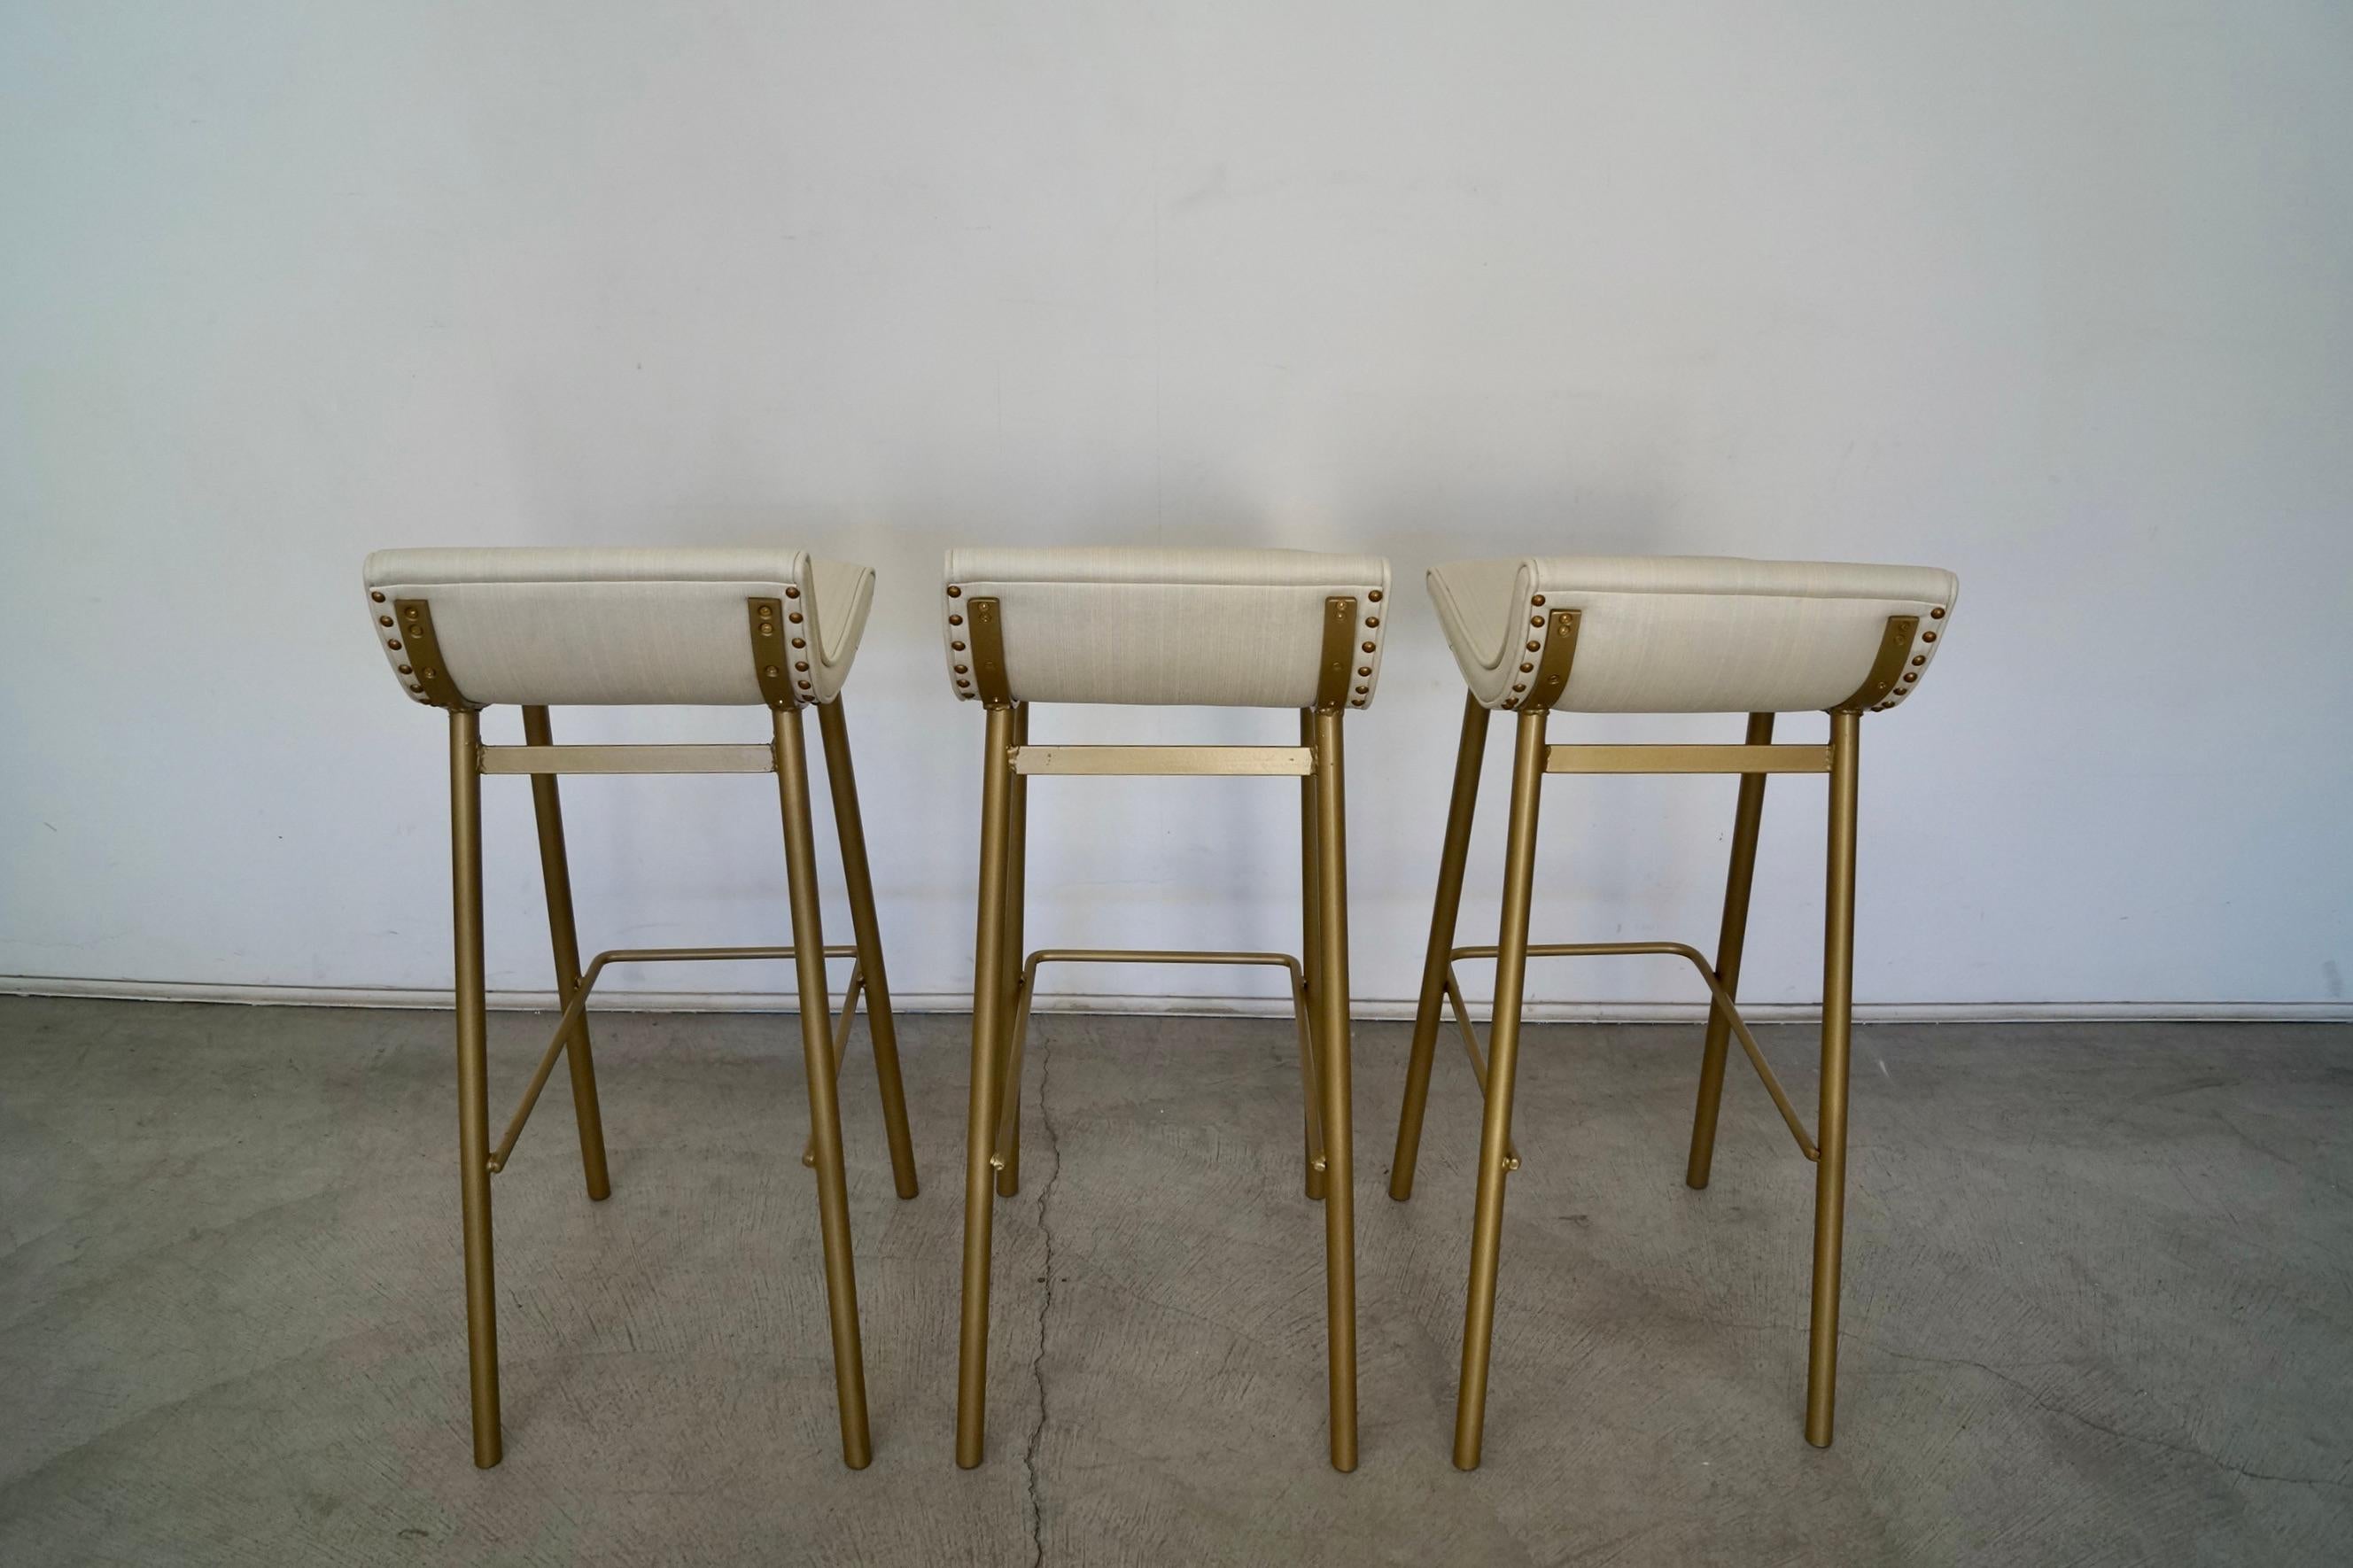 1950's Mid-Century Modern Bar Stools by Vista of California - Set of Three For Sale 4